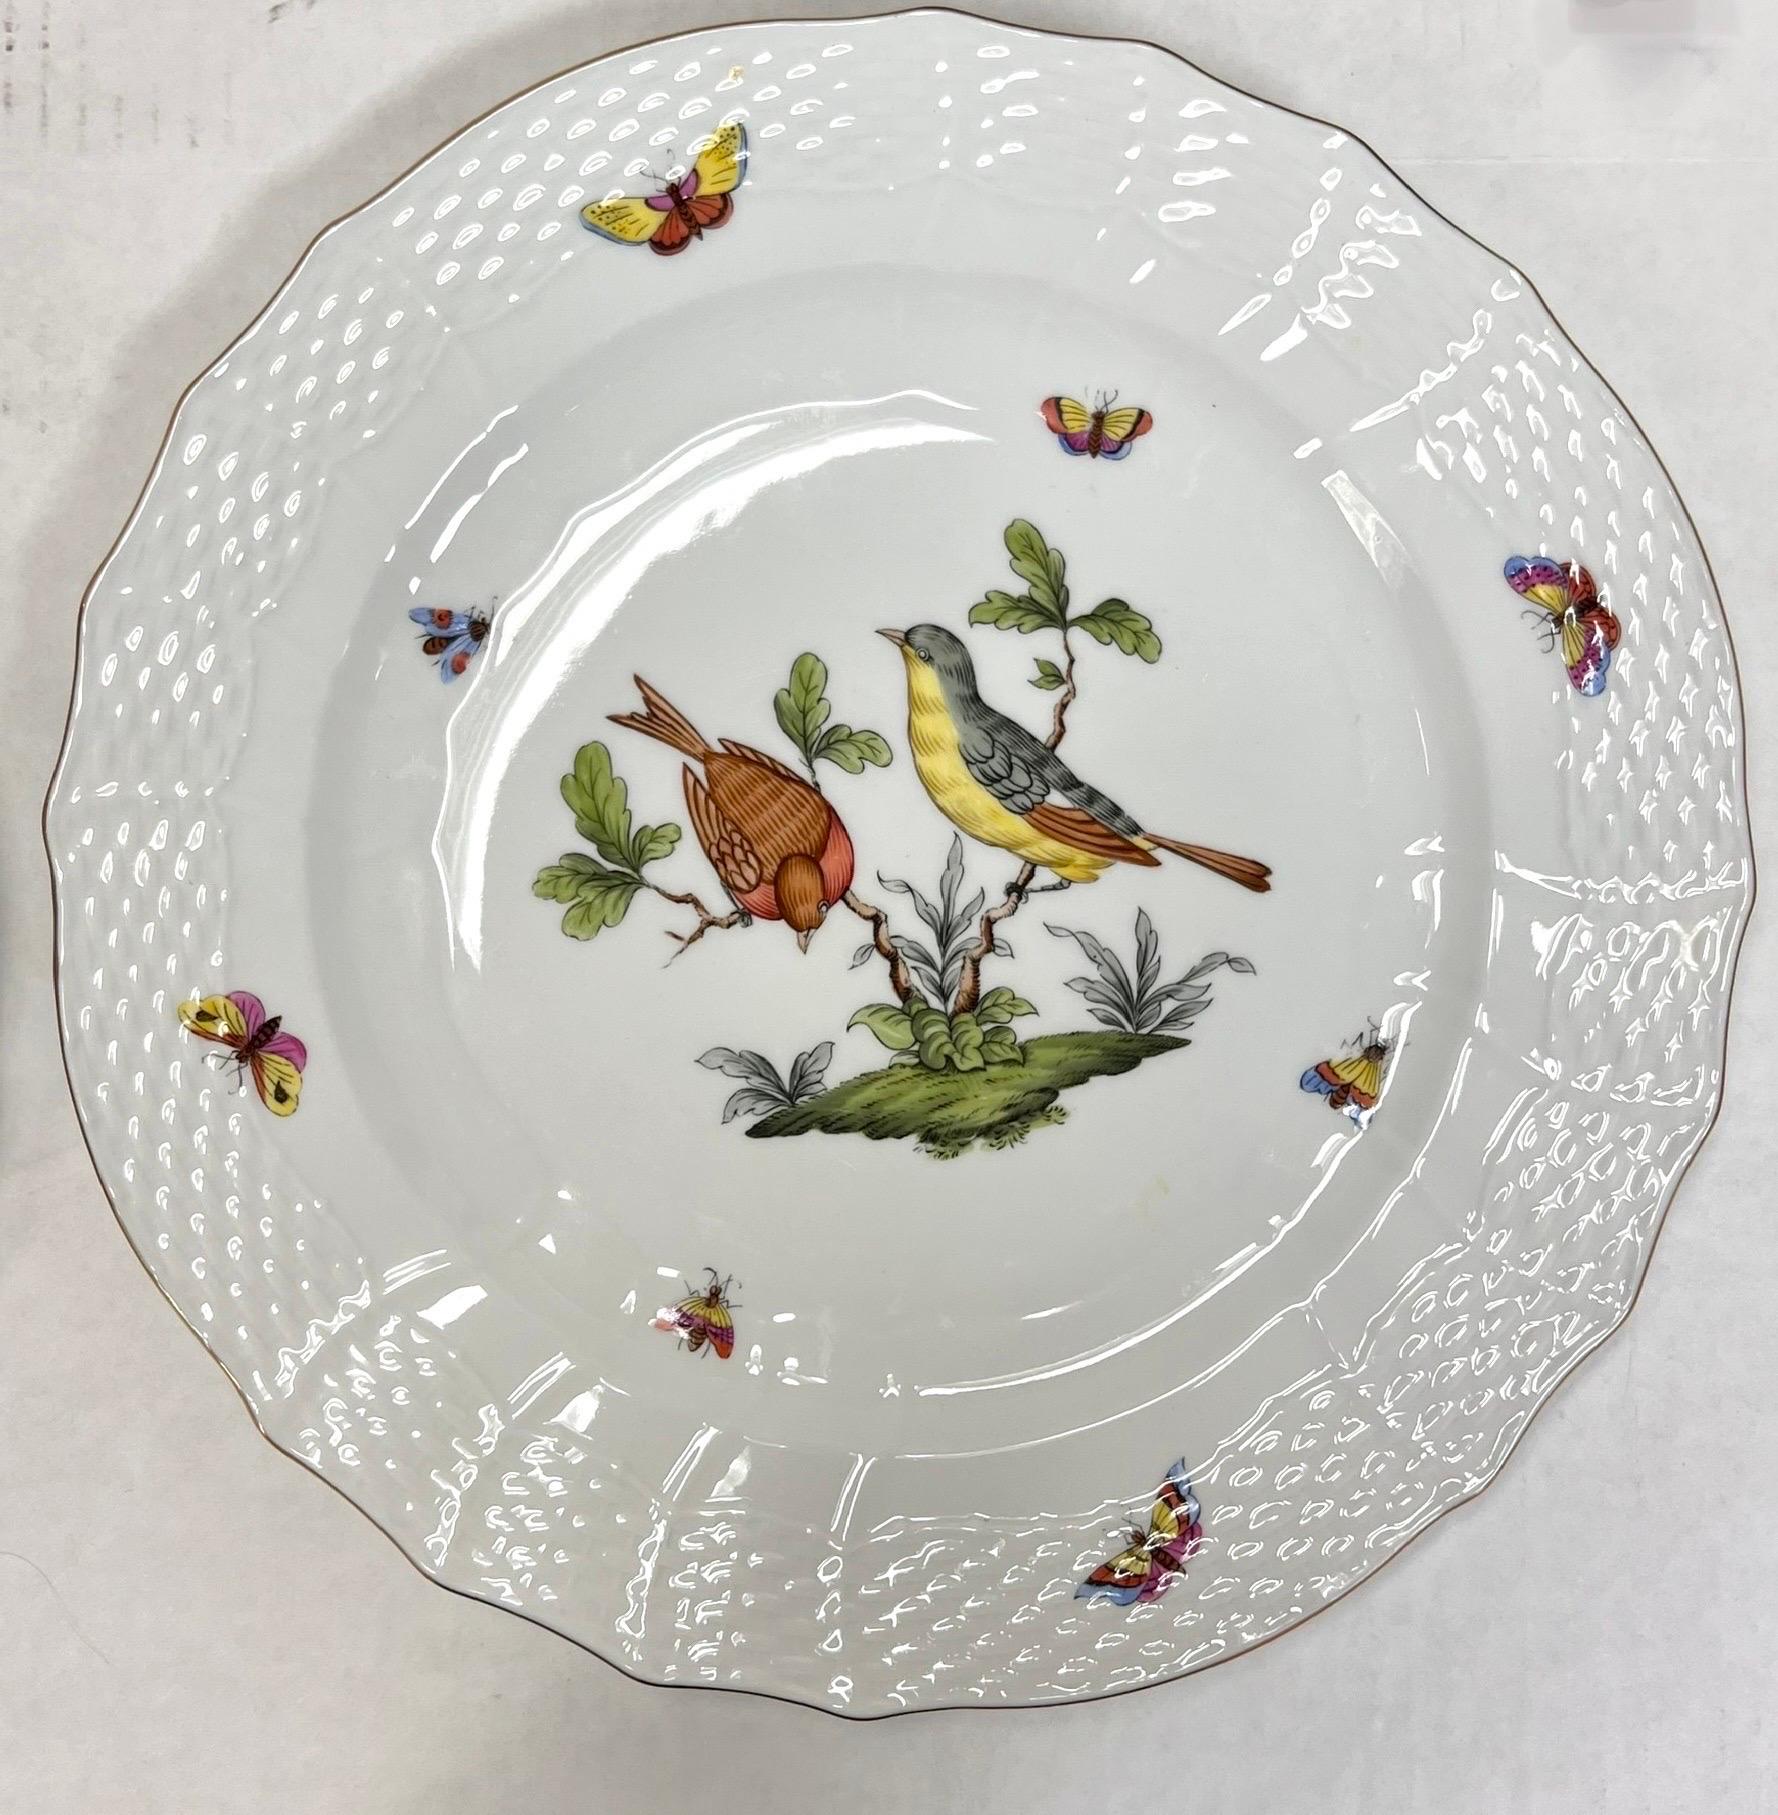 Herend Rothschild Bird pattern china: Includes complete service for 8 plus additional pieces - see pics and details.  You will receive all of the following in mint condition:
8 dinner (11